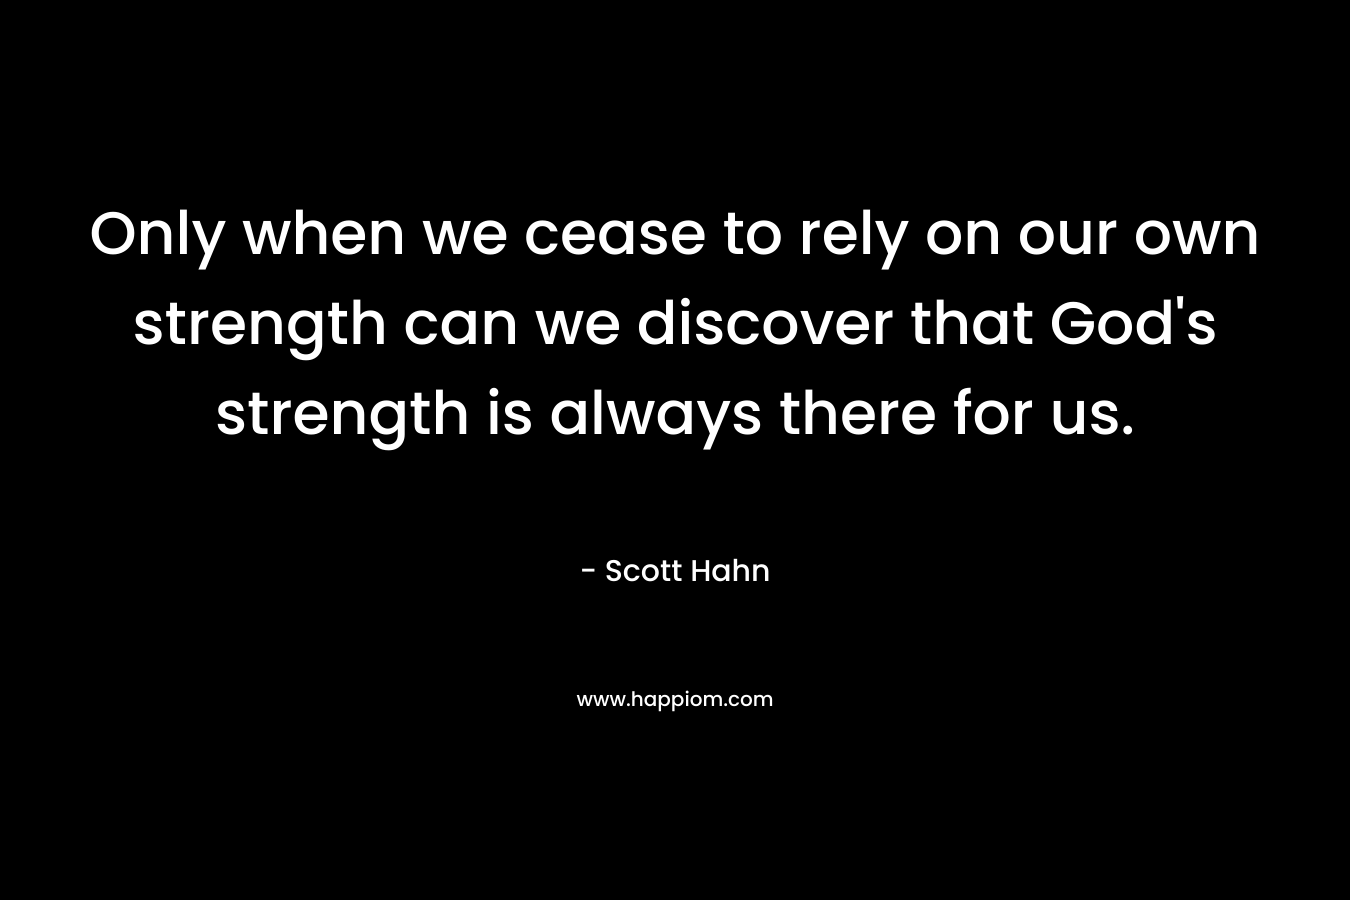 Only when we cease to rely on our own strength can we discover that God’s strength is always there for us. – Scott Hahn